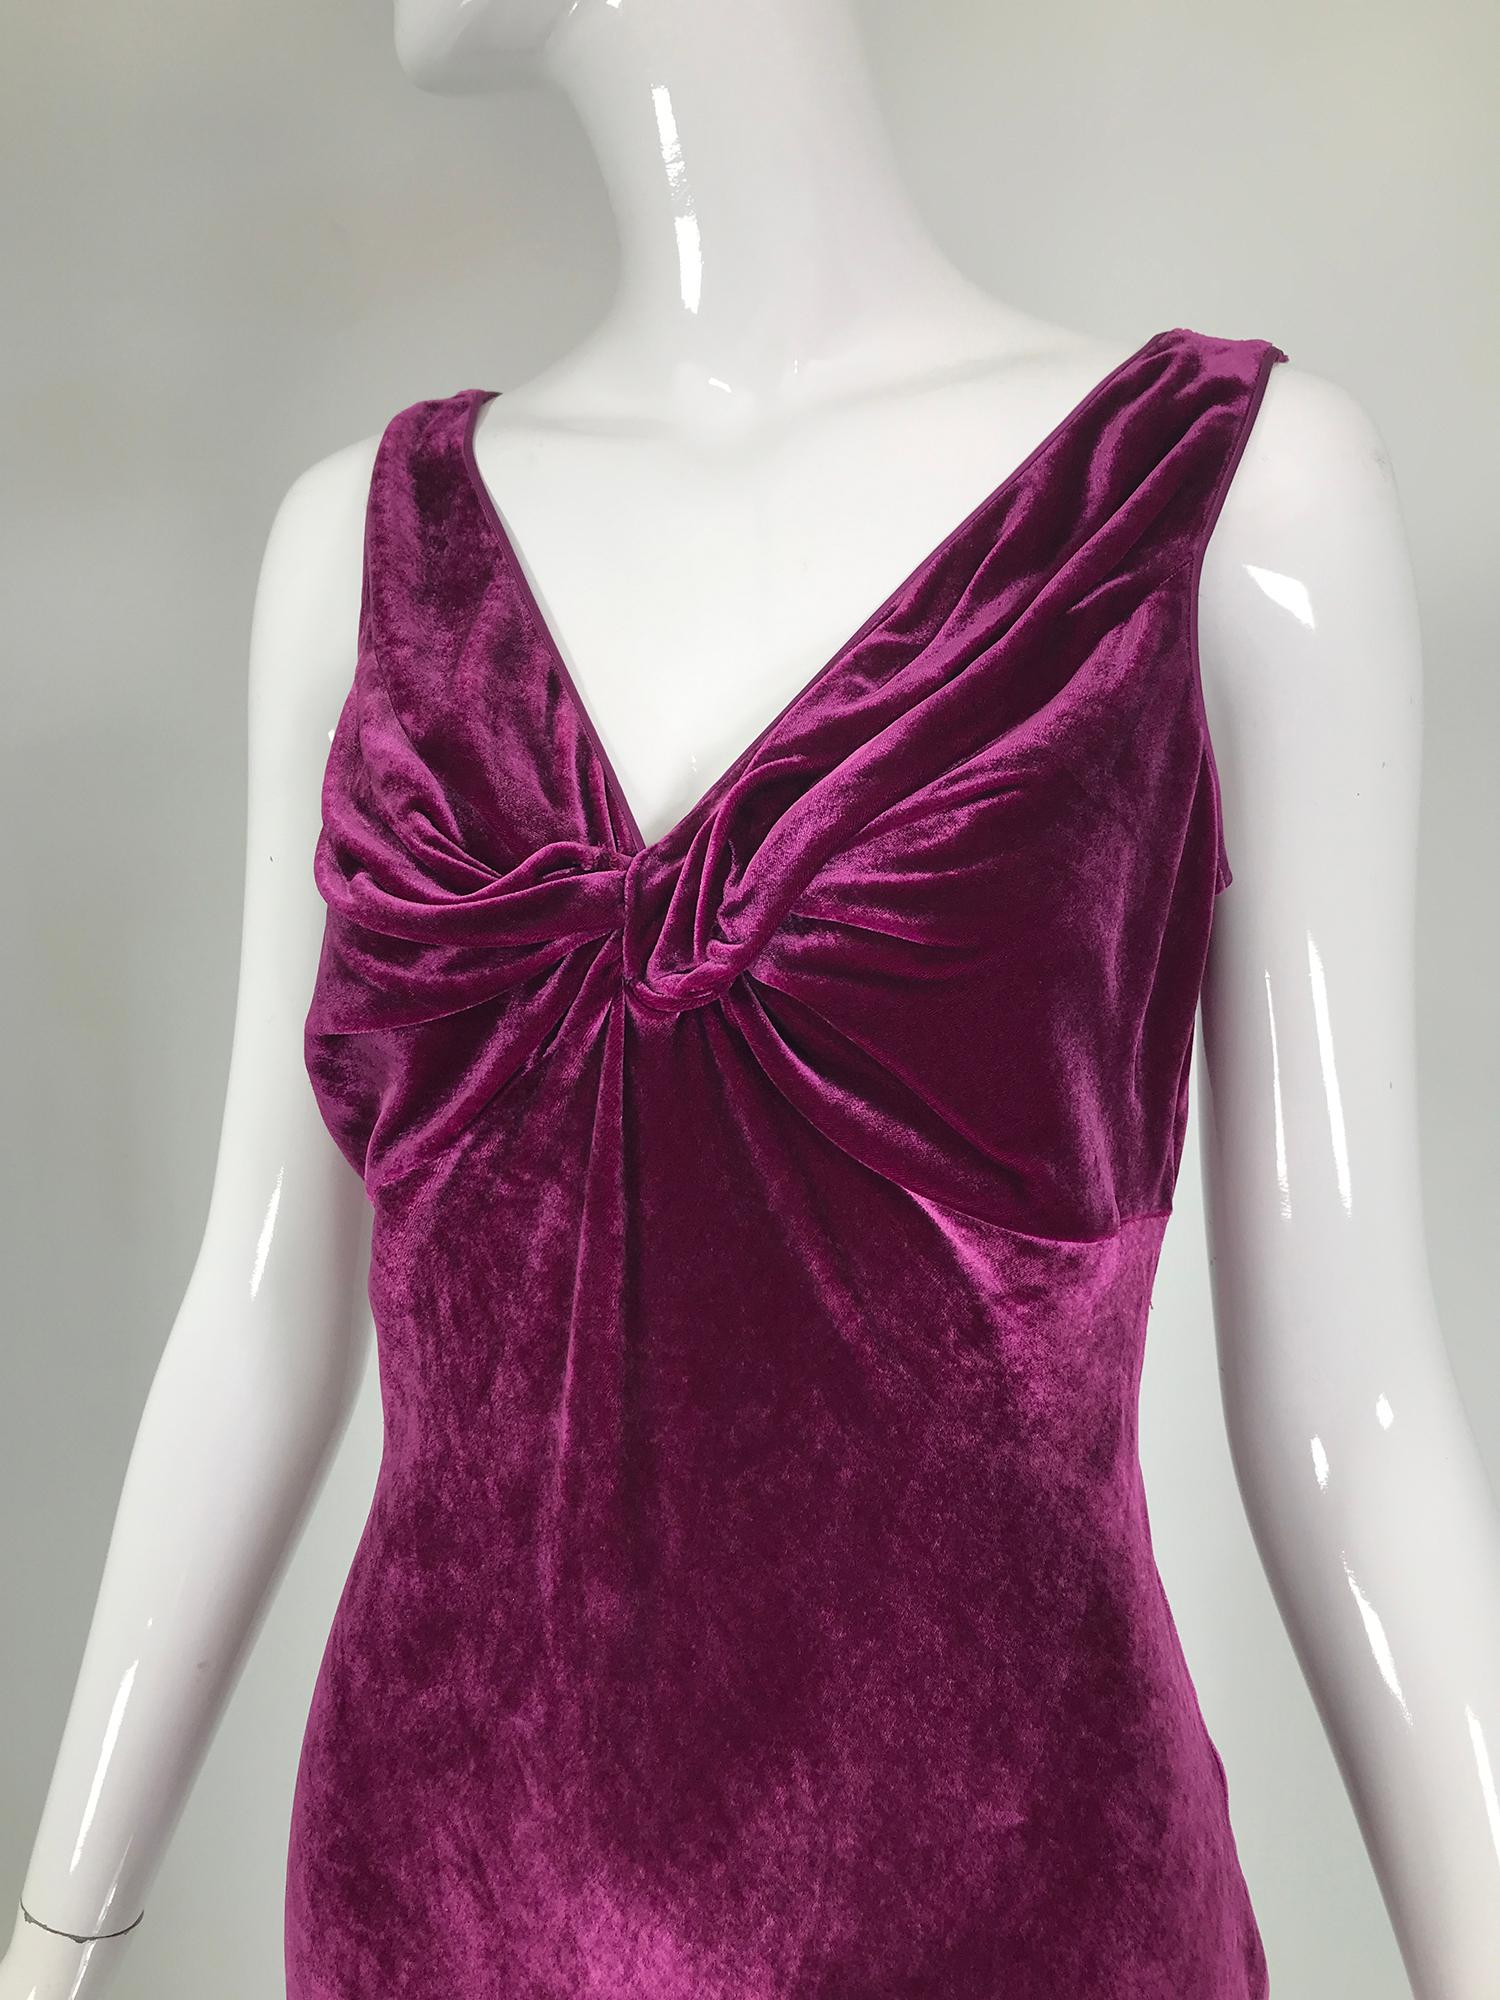 John Galliano 1930s Inspired Bias Cut Wine Velvet Evening Dress, early 2000's. Beautiful velvet dress with a gathered knot bodice front & V back neckline. The dress is fitted through the torso, hip & thigh and flares at the hem. The bias cut allows